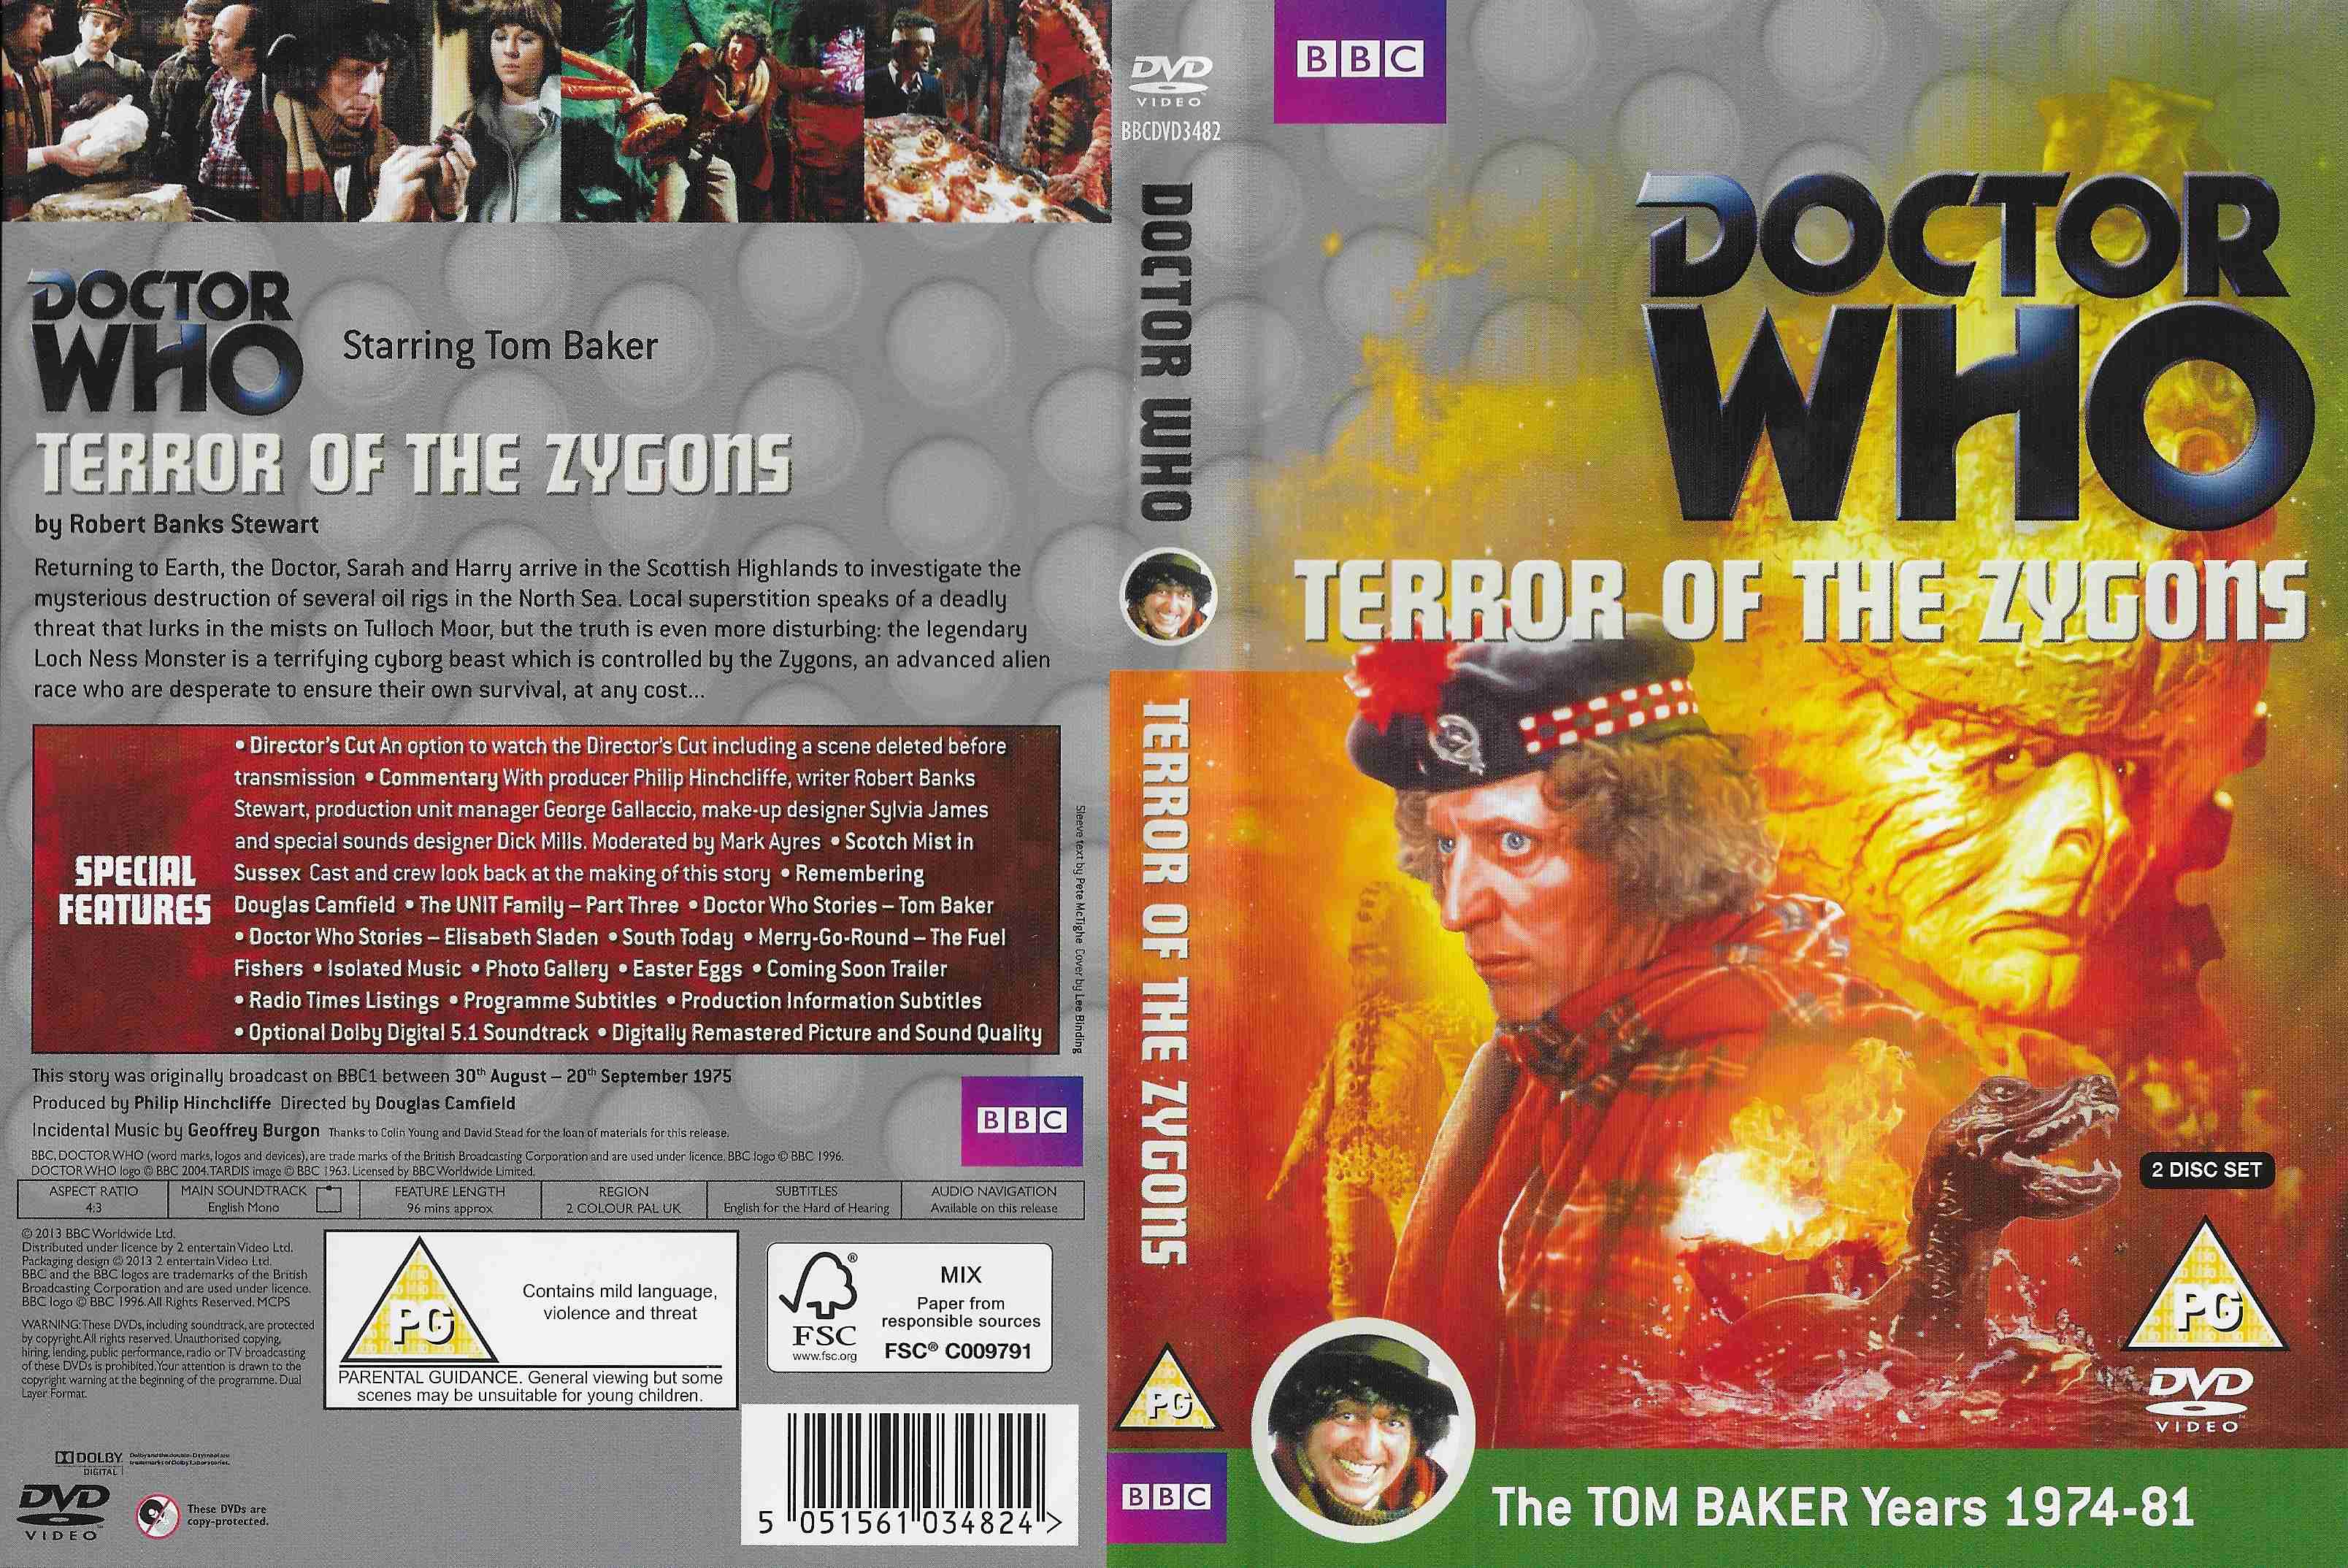 Picture of BBCDVD 3482 Doctor who - Terror of the Zygons by artist Robert Banks Stewart from the BBC records and Tapes library